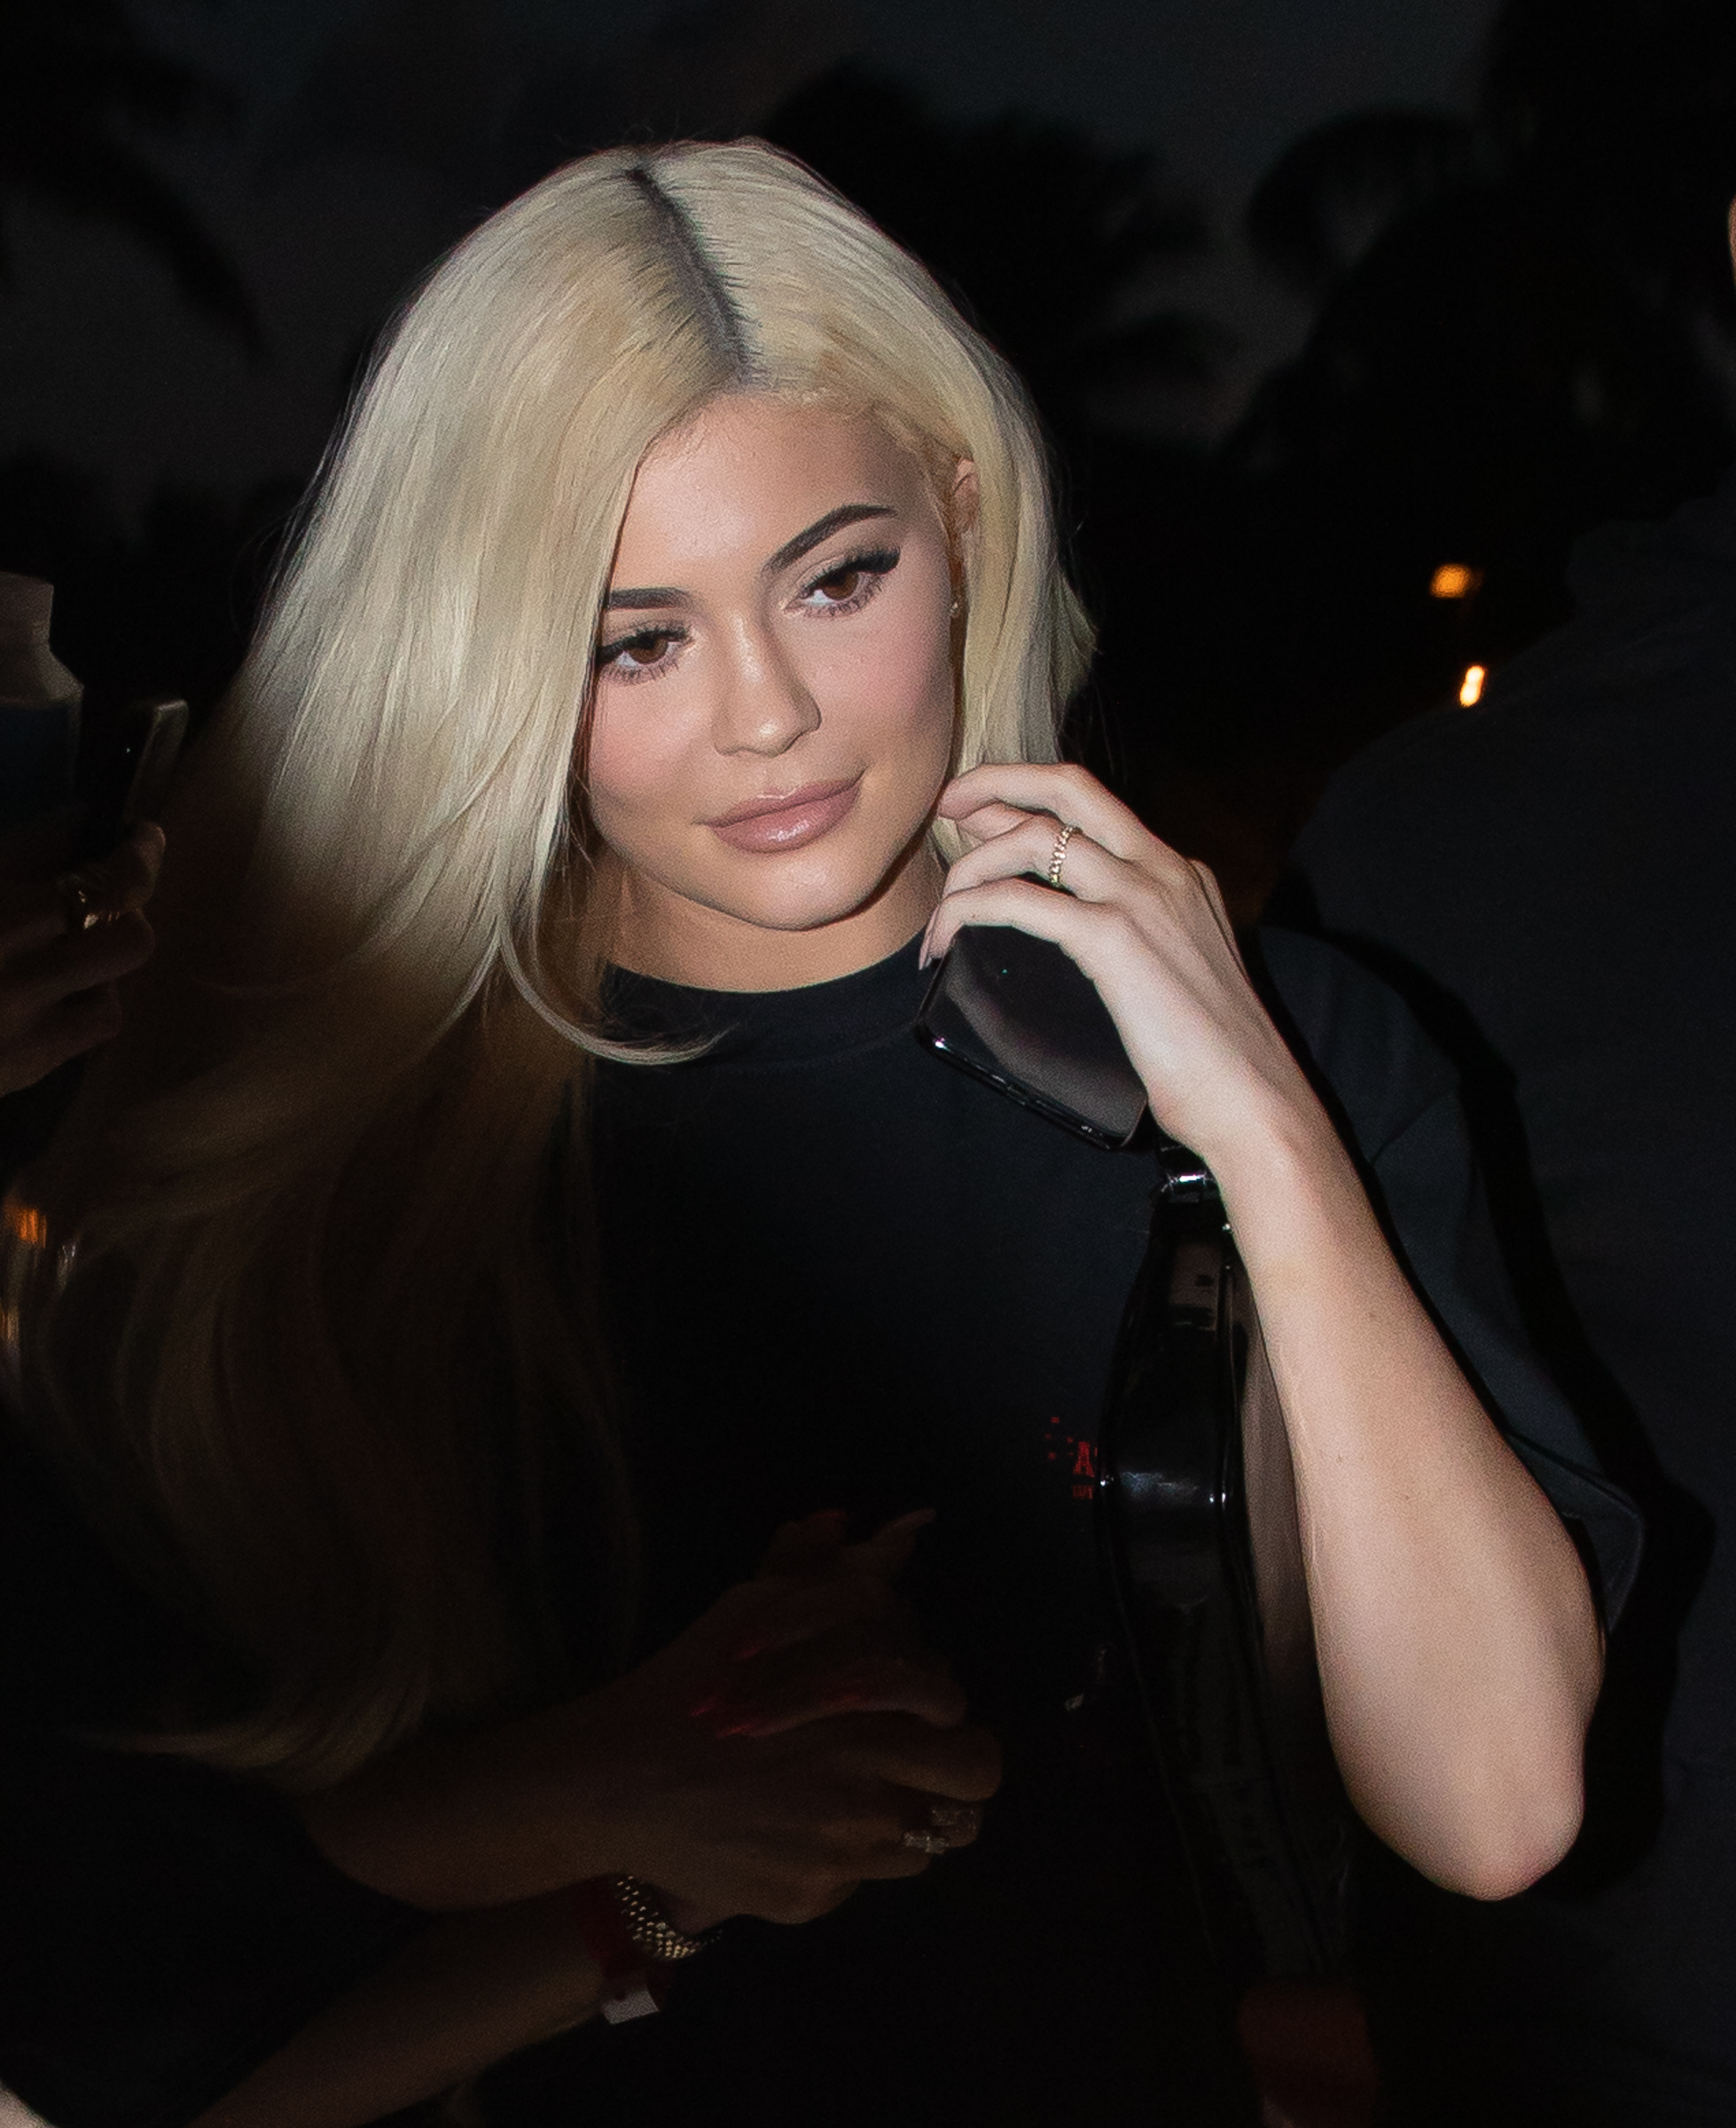 Kylie Jenner leaves Mr Chow restaurant at the W South Beach hotel in Miami with her BFF Jordyn Woods. Jenner wore white long boots and a Travis Scott tour t-shirt as she headed to his Sunday night tour date. She also sported a diamond ring on her wedding finger amid rumors of an engagement to Scott.